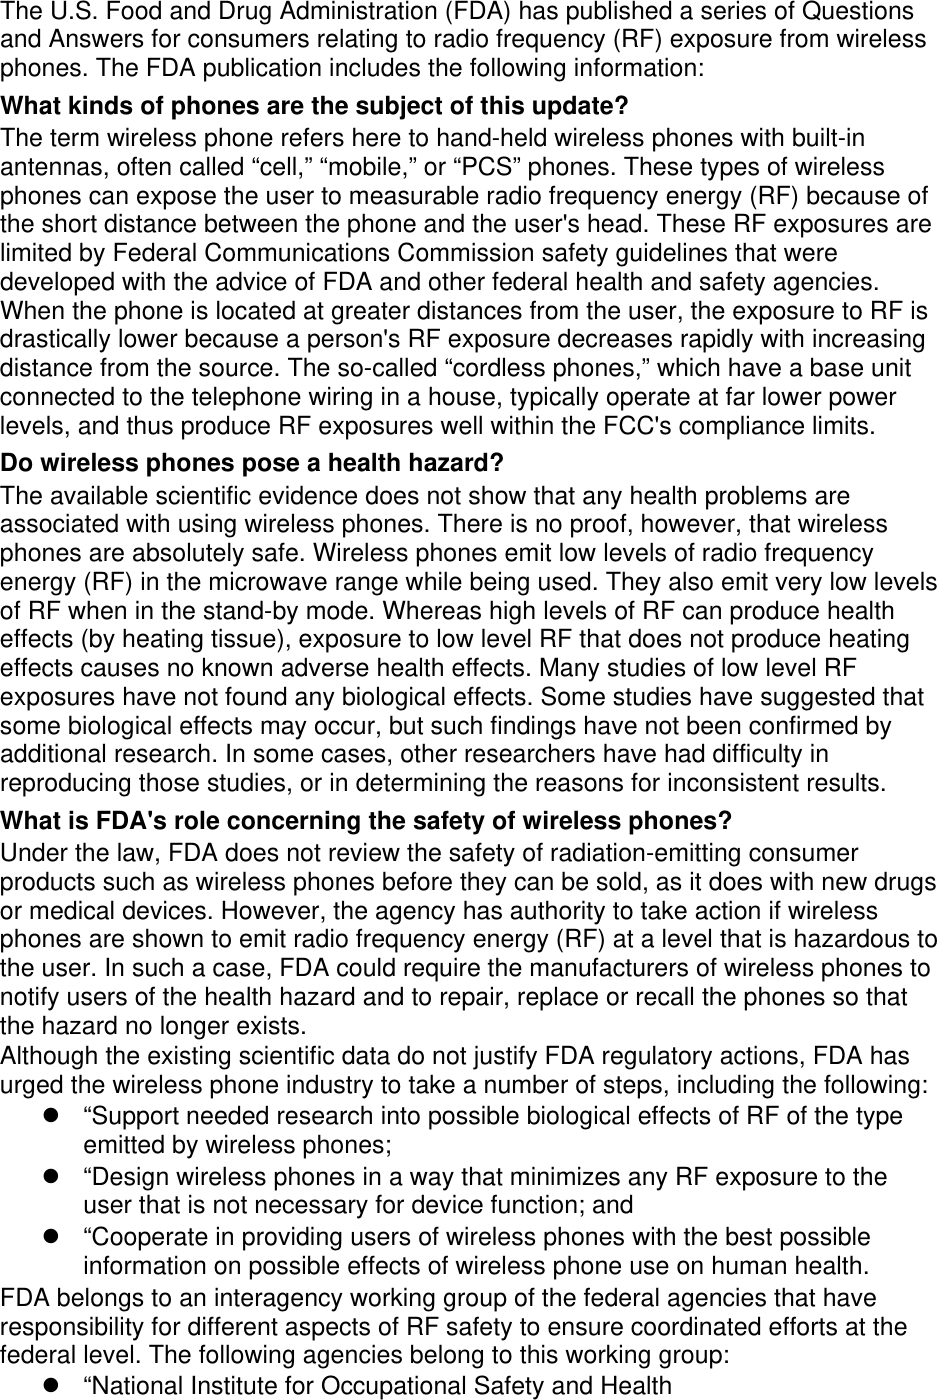 The U.S. Food and Drug Administration (FDA) has published a series of Questions and Answers for consumers relating to radio frequency (RF) exposure from wireless phones. The FDA publication includes the following information: What kinds of phones are the subject of this update? The term wireless phone refers here to hand-held wireless phones with built-in antennas, often called “cell,” “mobile,” or “PCS” phones. These types of wireless phones can expose the user to measurable radio frequency energy (RF) because of the short distance between the phone and the user&apos;s head. These RF exposures are limited by Federal Communications Commission safety guidelines that were developed with the advice of FDA and other federal health and safety agencies. When the phone is located at greater distances from the user, the exposure to RF is drastically lower because a person&apos;s RF exposure decreases rapidly with increasing distance from the source. The so-called “cordless phones,” which have a base unit connected to the telephone wiring in a house, typically operate at far lower power levels, and thus produce RF exposures well within the FCC&apos;s compliance limits. Do wireless phones pose a health hazard? The available scientific evidence does not show that any health problems are associated with using wireless phones. There is no proof, however, that wireless phones are absolutely safe. Wireless phones emit low levels of radio frequency energy (RF) in the microwave range while being used. They also emit very low levels of RF when in the stand-by mode. Whereas high levels of RF can produce health effects (by heating tissue), exposure to low level RF that does not produce heating effects causes no known adverse health effects. Many studies of low level RF exposures have not found any biological effects. Some studies have suggested that some biological effects may occur, but such findings have not been confirmed by additional research. In some cases, other researchers have had difficulty in reproducing those studies, or in determining the reasons for inconsistent results. What is FDA&apos;s role concerning the safety of wireless phones? Under the law, FDA does not review the safety of radiation-emitting consumer products such as wireless phones before they can be sold, as it does with new drugs or medical devices. However, the agency has authority to take action if wireless phones are shown to emit radio frequency energy (RF) at a level that is hazardous to the user. In such a case, FDA could require the manufacturers of wireless phones to notify users of the health hazard and to repair, replace or recall the phones so that the hazard no longer exists. Although the existing scientific data do not justify FDA regulatory actions, FDA has urged the wireless phone industry to take a number of steps, including the following: “Support needed research into possible biological effects of RF of the typeemitted by wireless phones;“Design wireless phones in a way that minimizes any RF exposure to theuser that is not necessary for device function; and“Cooperate in providing users of wireless phones with the best possibleinformation on possible effects of wireless phone use on human health.FDA belongs to an interagency working group of the federal agencies that have responsibility for different aspects of RF safety to ensure coordinated efforts at the federal level. The following agencies belong to this working group: “National Institute for Occupational Safety and Health